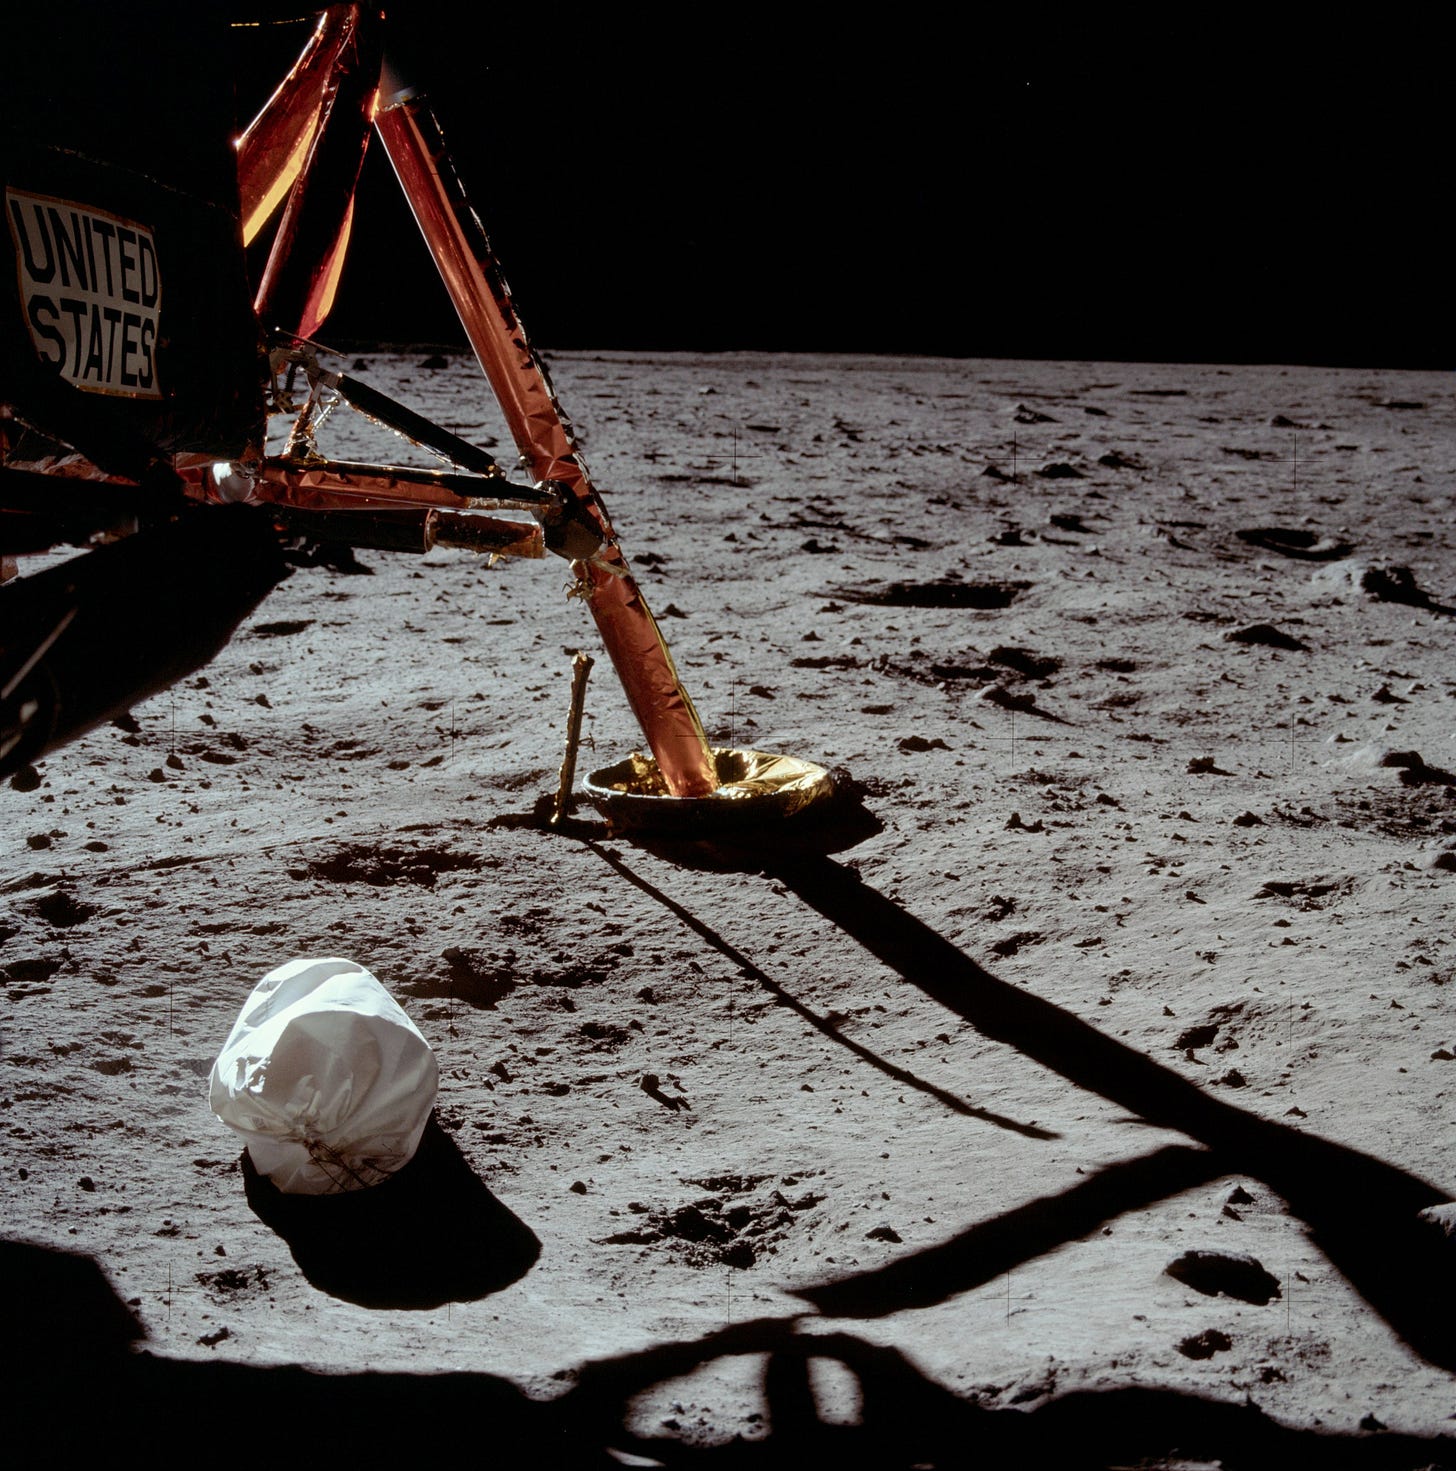 A color photo taken on the Moon's surface. The horizon is in the distance, with an empty black sky above. In the foreground is the landing strut of the Descent Stage, with "United States" written on the side of the craft. A white fabric bag lies underneath the craft.